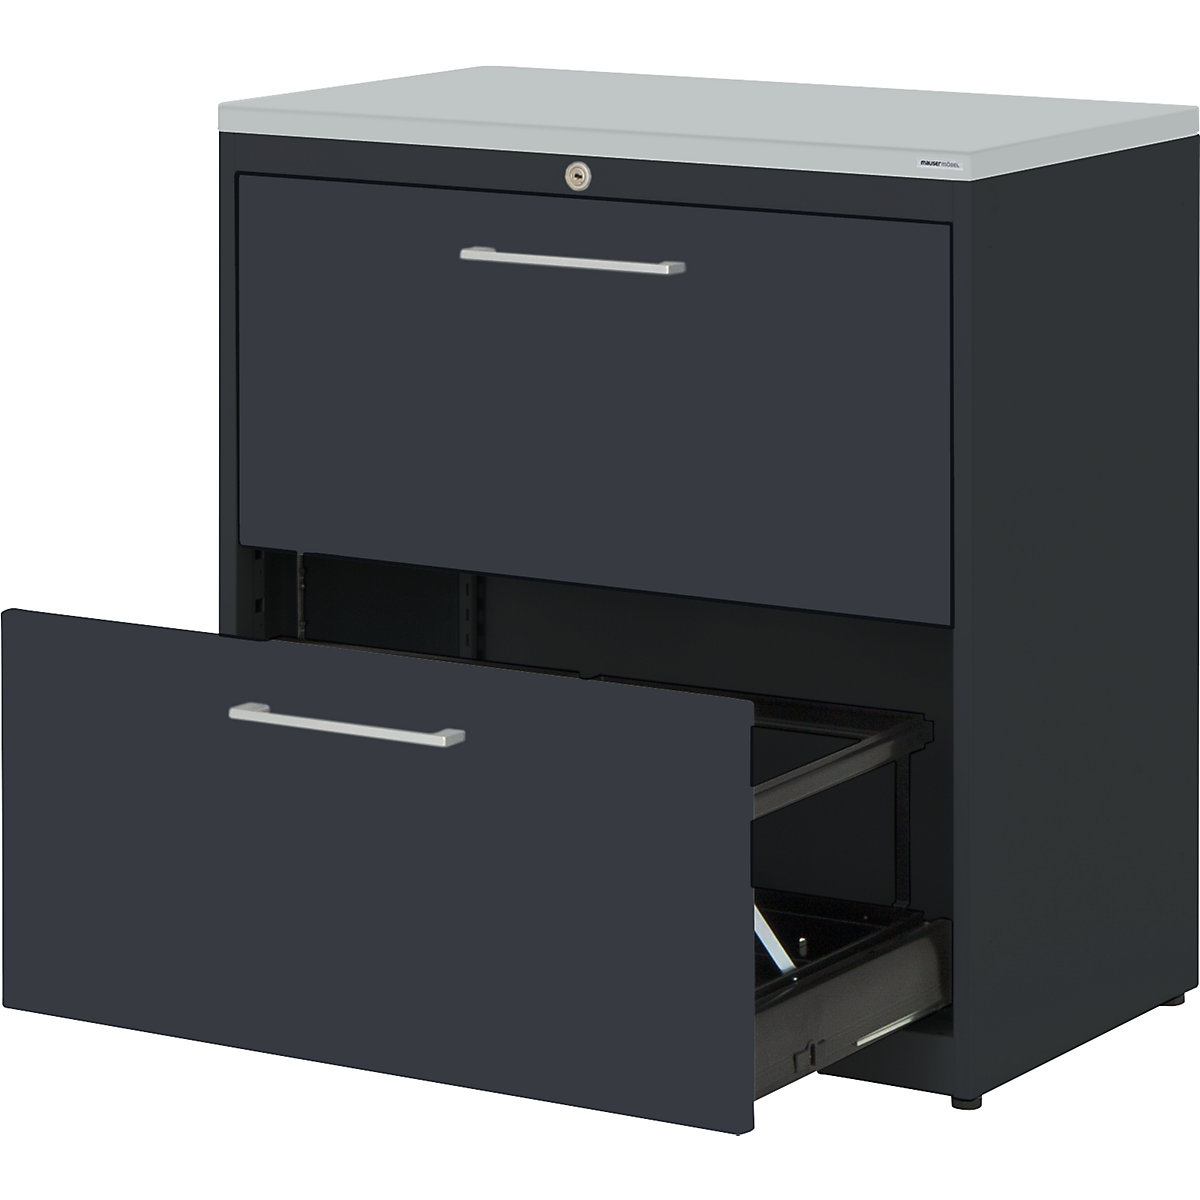 Suspension filing cabinet – mauser, plastic panel, 2 drawers, 2 tracks, with dampers, charcoal / charcoal / light grey-6